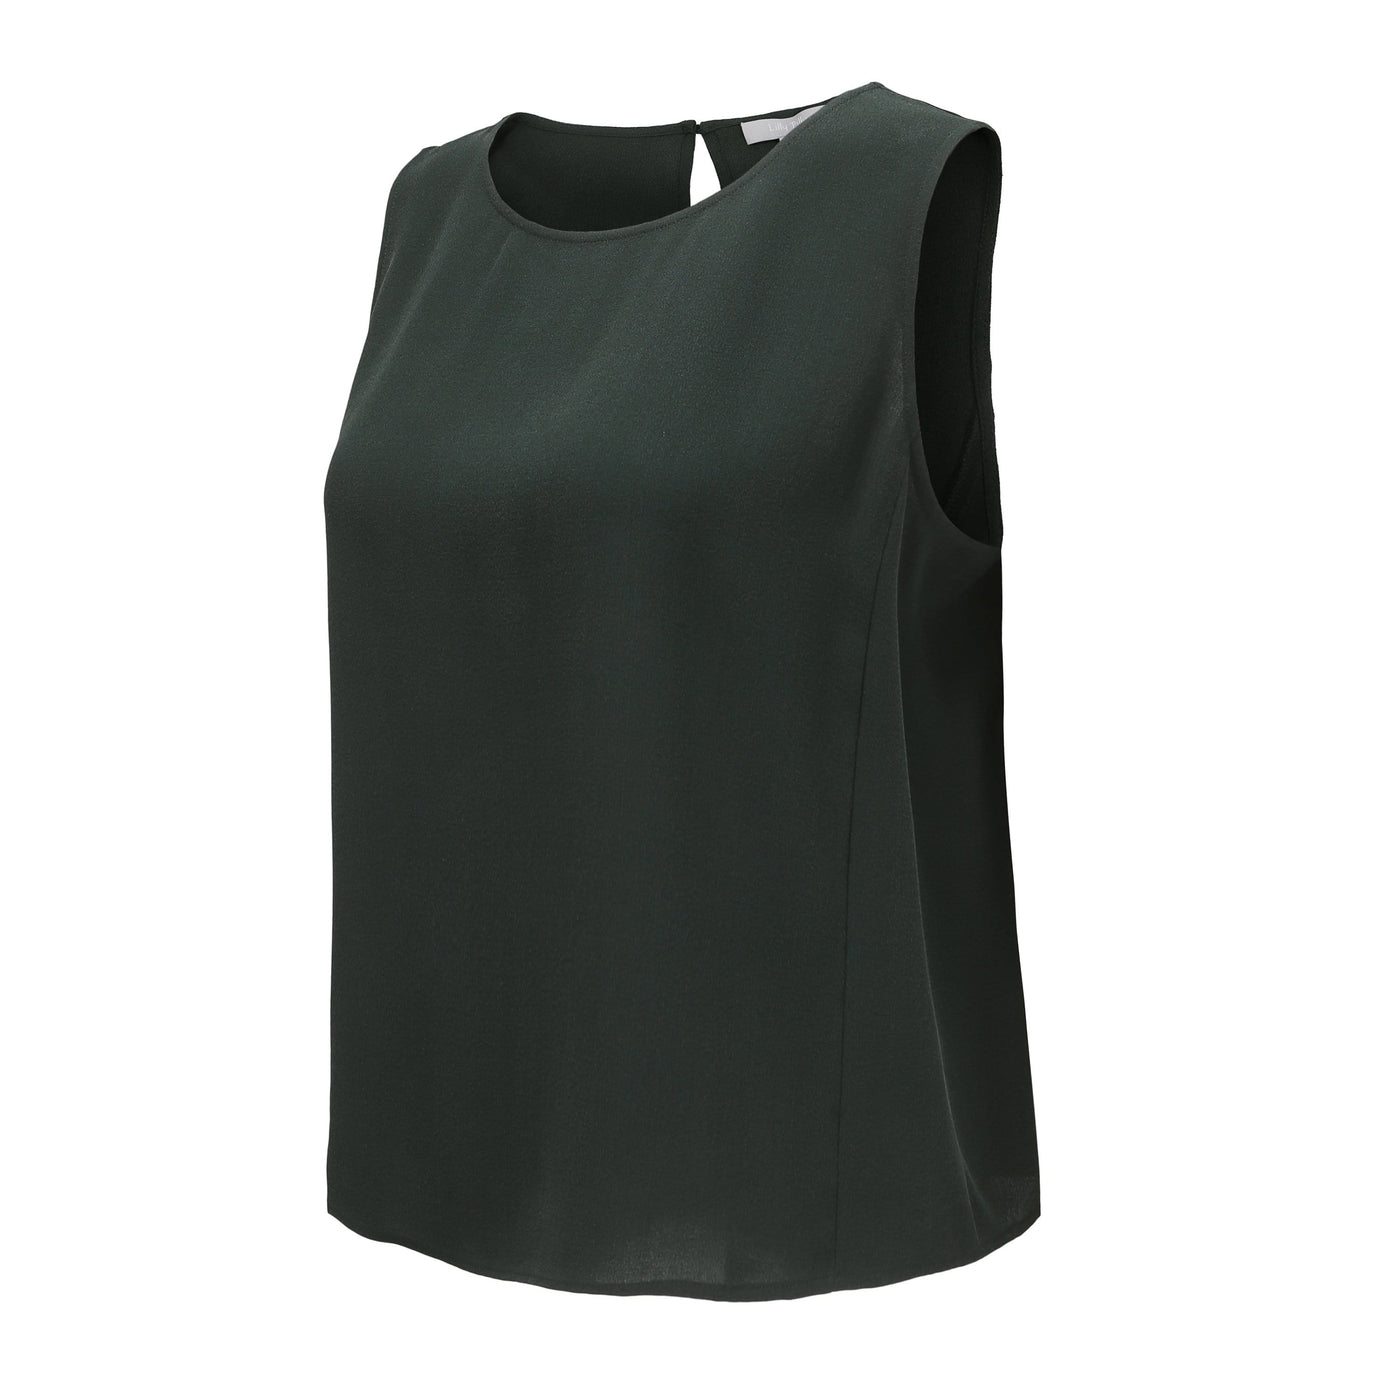 Lilly Pilly Collection bluesign® certified silk Lulu Tank in Bottle Green as 3D image showing front and side view